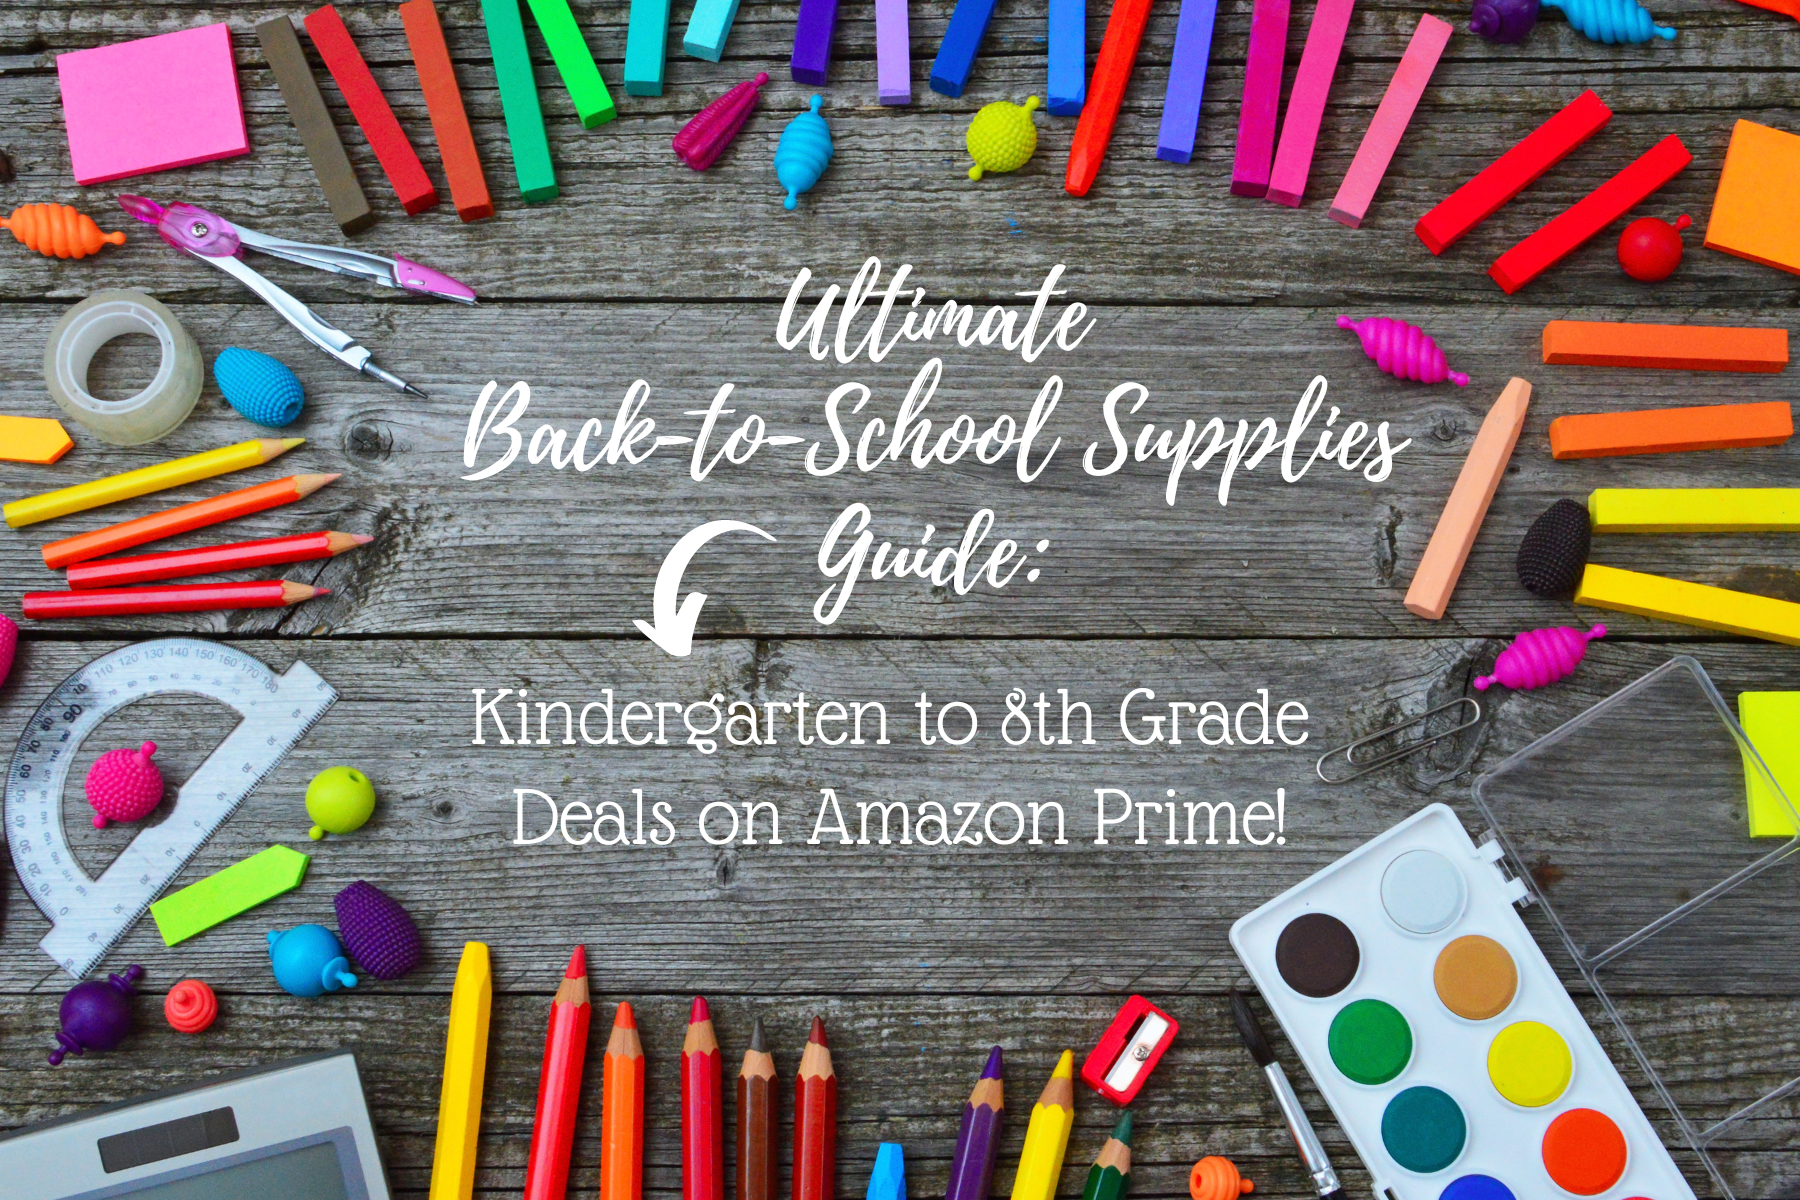 Ultimate Back-to-School Supplies Guide: Kindergarten to 8th Grade Deals on Amazon Prime!